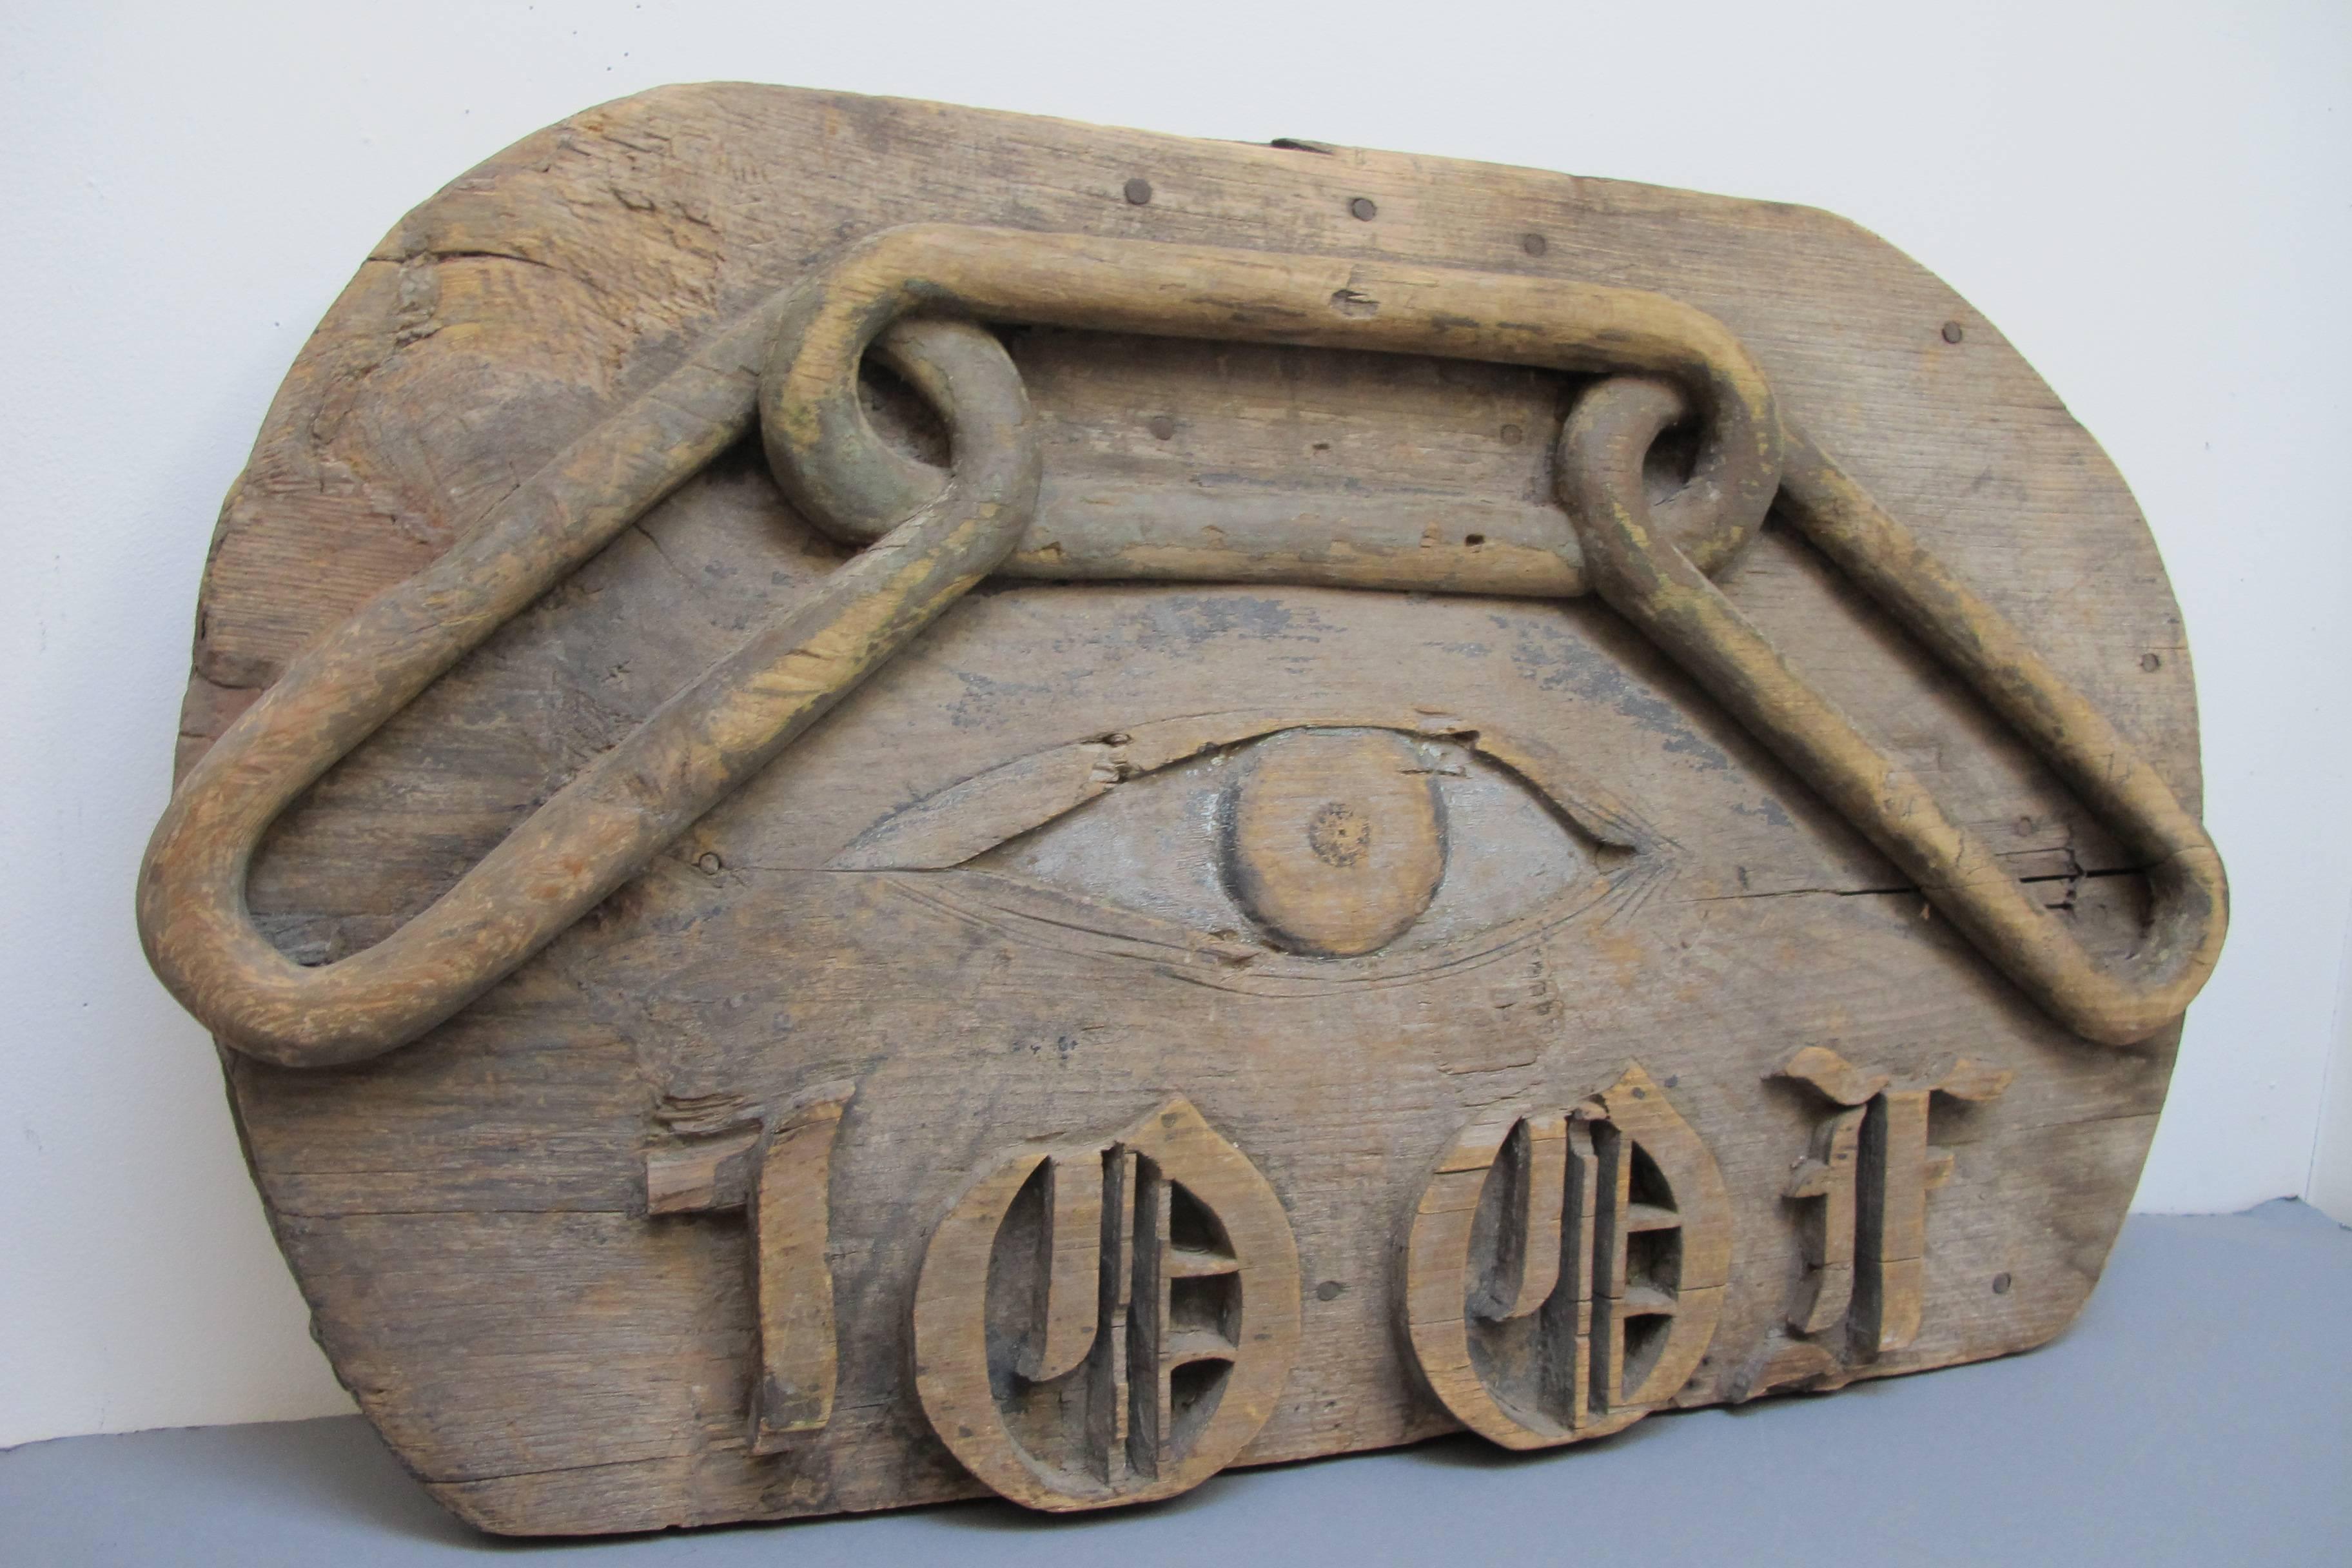 Carved wood sign from a Pennsylvania fraternal lodge with 'All Seeing Eye'.
The three links of a chain stands for members bond of Friendship, Loyalty, and Trust. Below are the initials IOOF of International Order of Odd Fellows.
